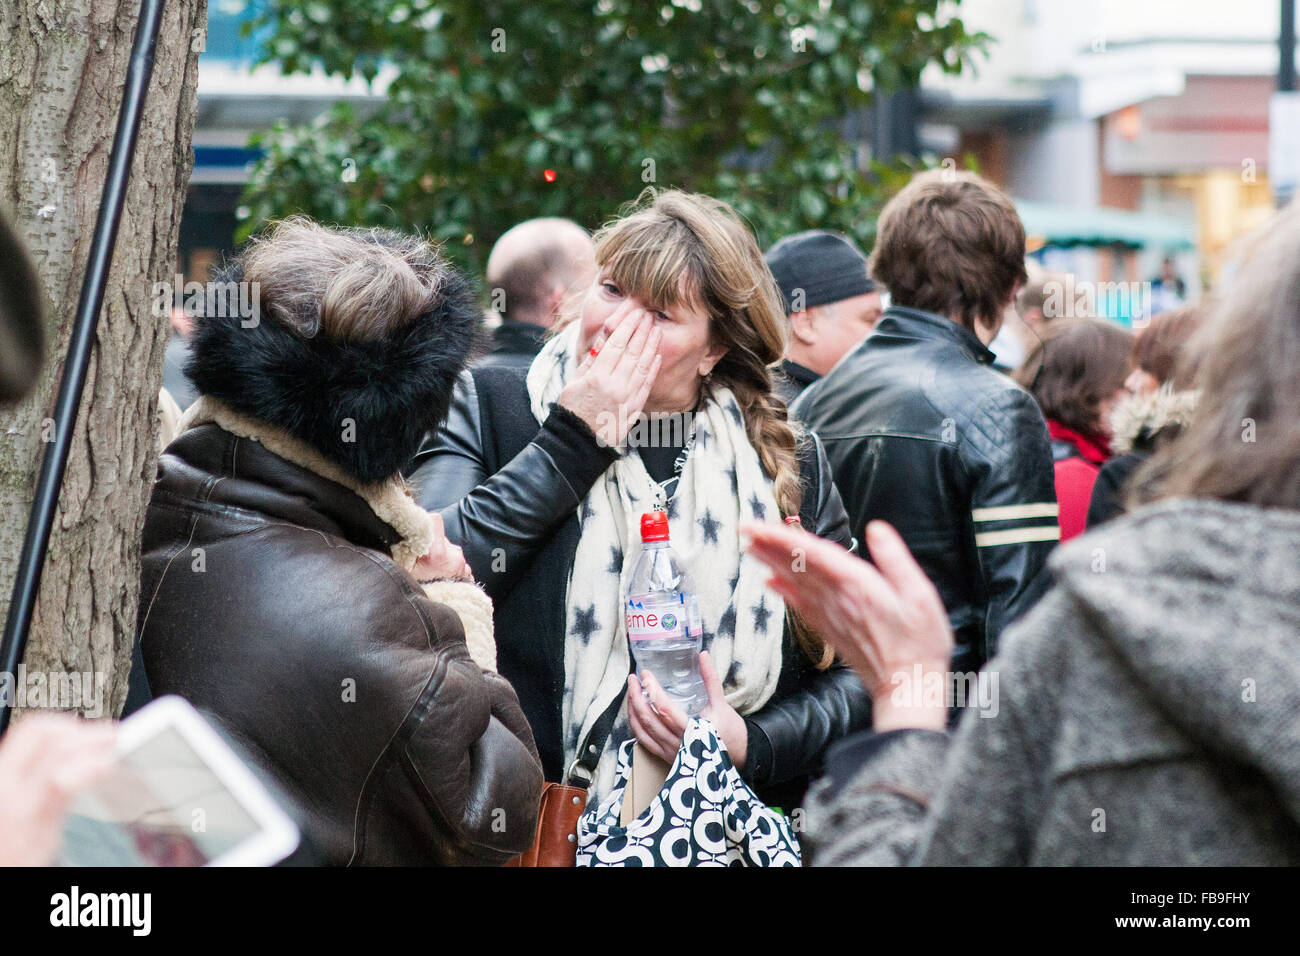 London, UK. 12th January, 2016. Fan wiping away tears as tributes and messages from others lie beneath a mural of the late David Bowie. Brixton Underground station, London, UK. © martyn wheatley/Alamy Live News Stock Photo